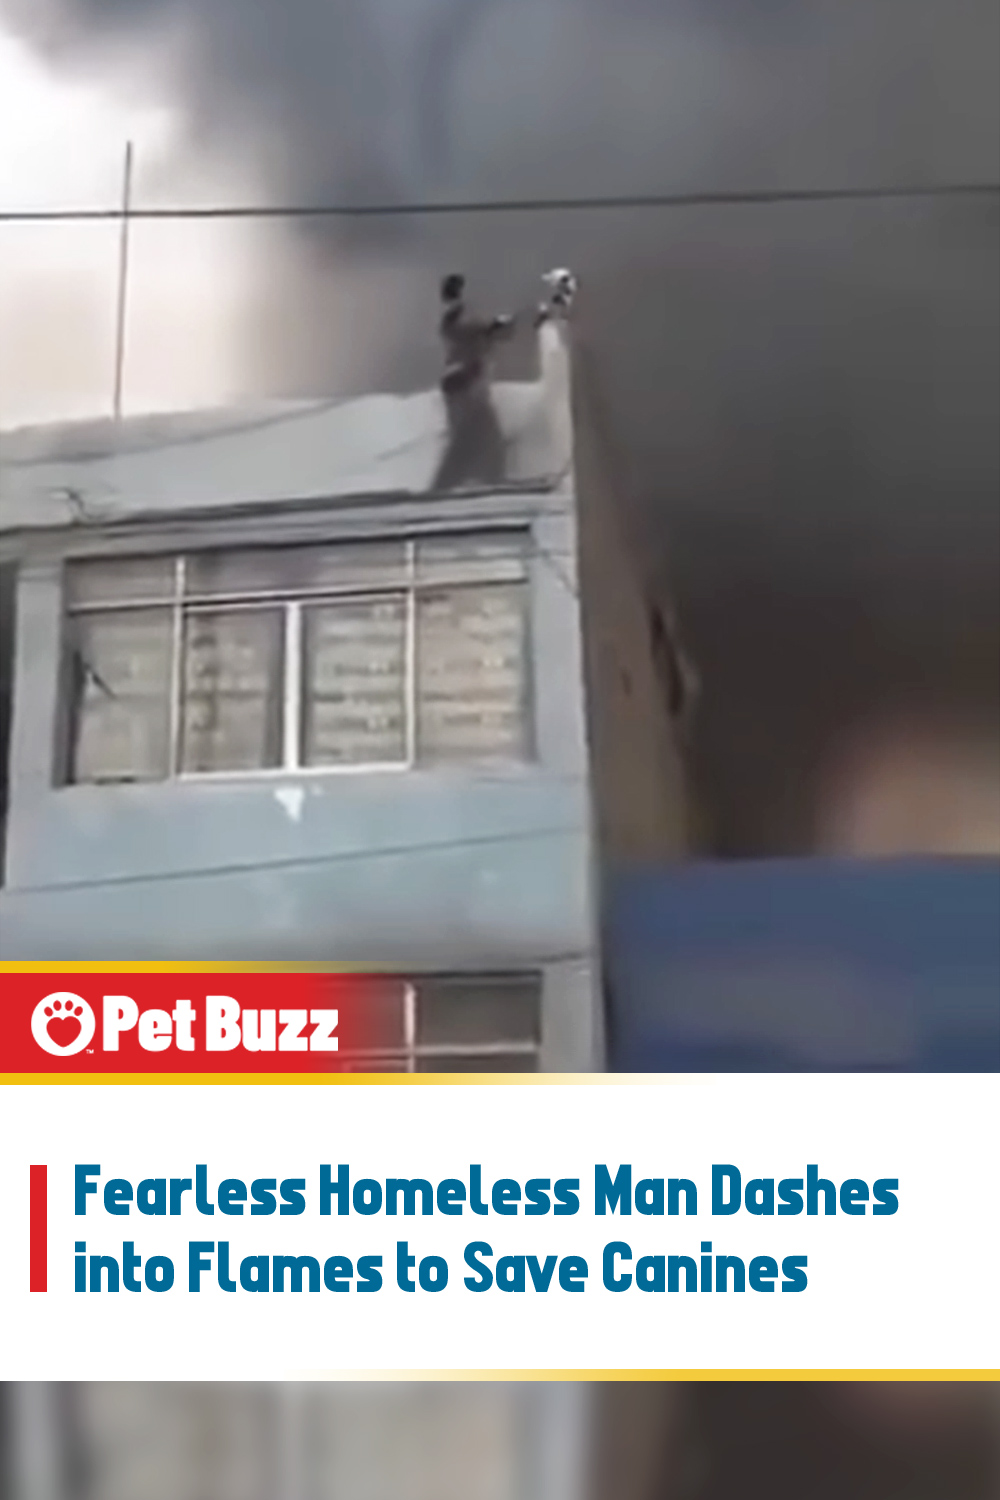 Fearless Homeless Man Dashes into Flames to Save Canines